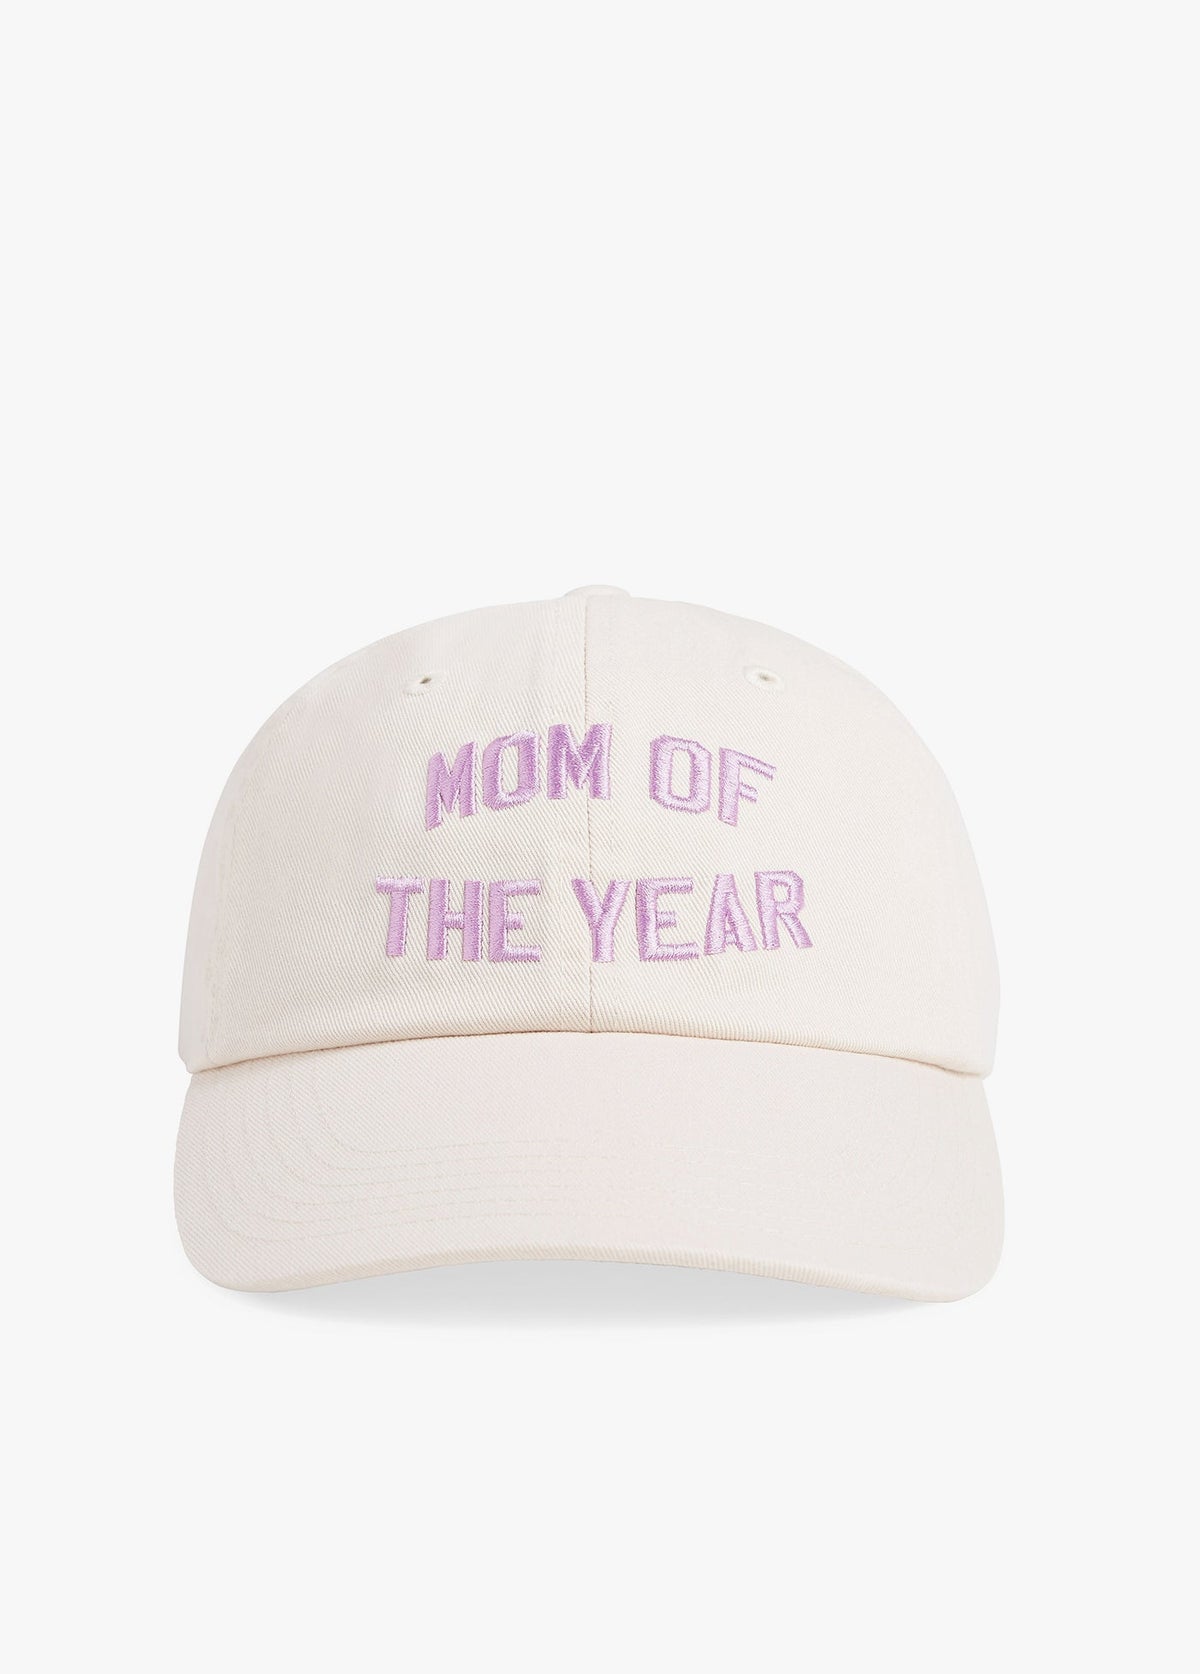 MOM OF THE YEAR HAT